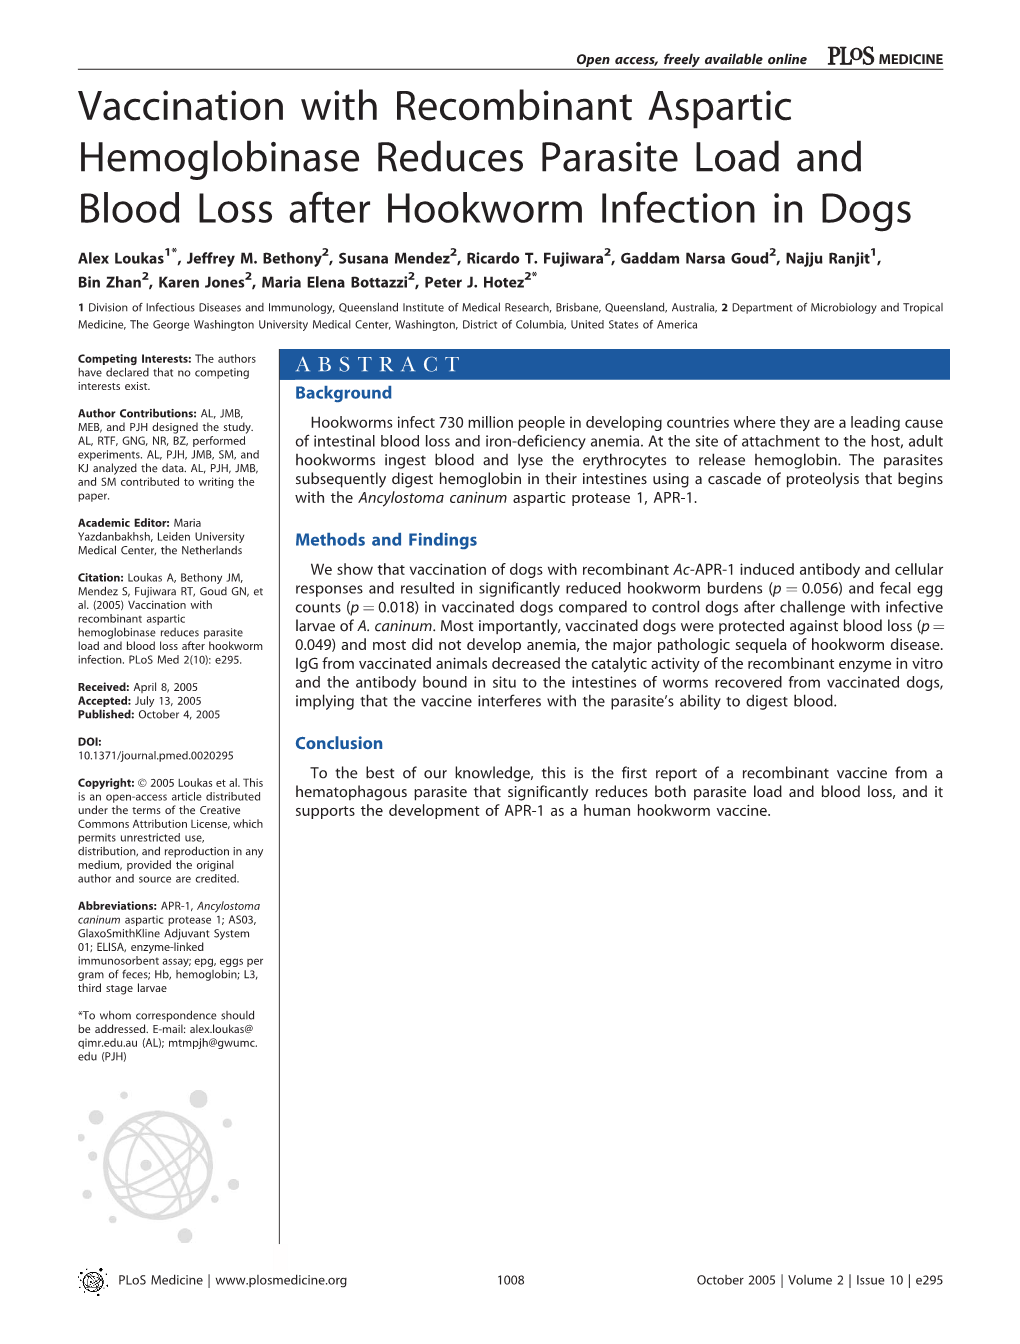 Vaccination with Recombinant Aspartic Hemoglobinase Reduces Parasitic Load and Blood Loss After Hookworm Infection in Dogs